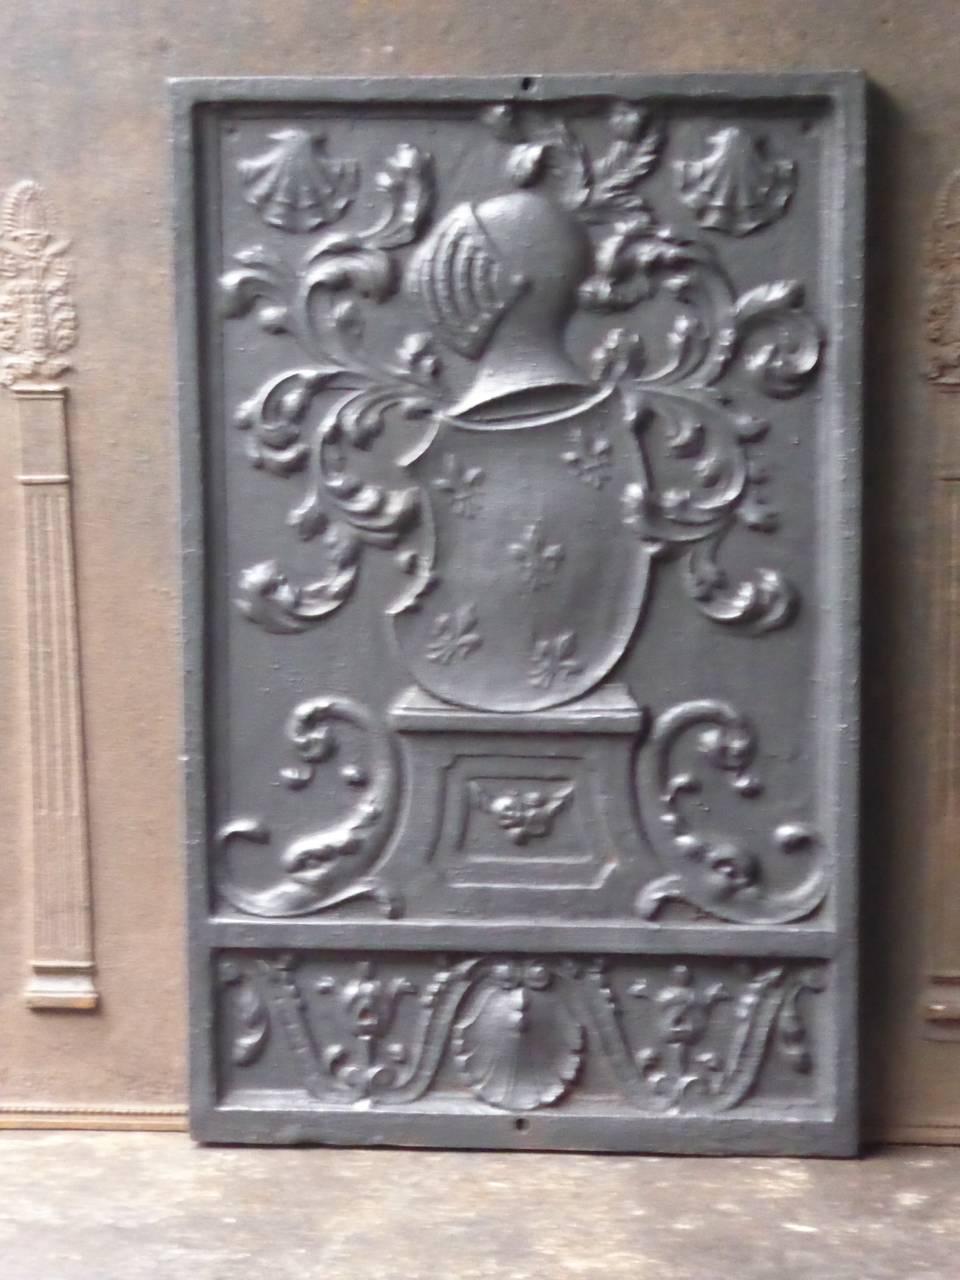 French Louis XIV style fireback with a coat of arms.

The fireback is made of cast iron and has a black / pewter patina. The condition is good, no cracks.

This product weighs more than 65 kg / 143 lbs. All our products that weigh 66 kg / 146 lbs or